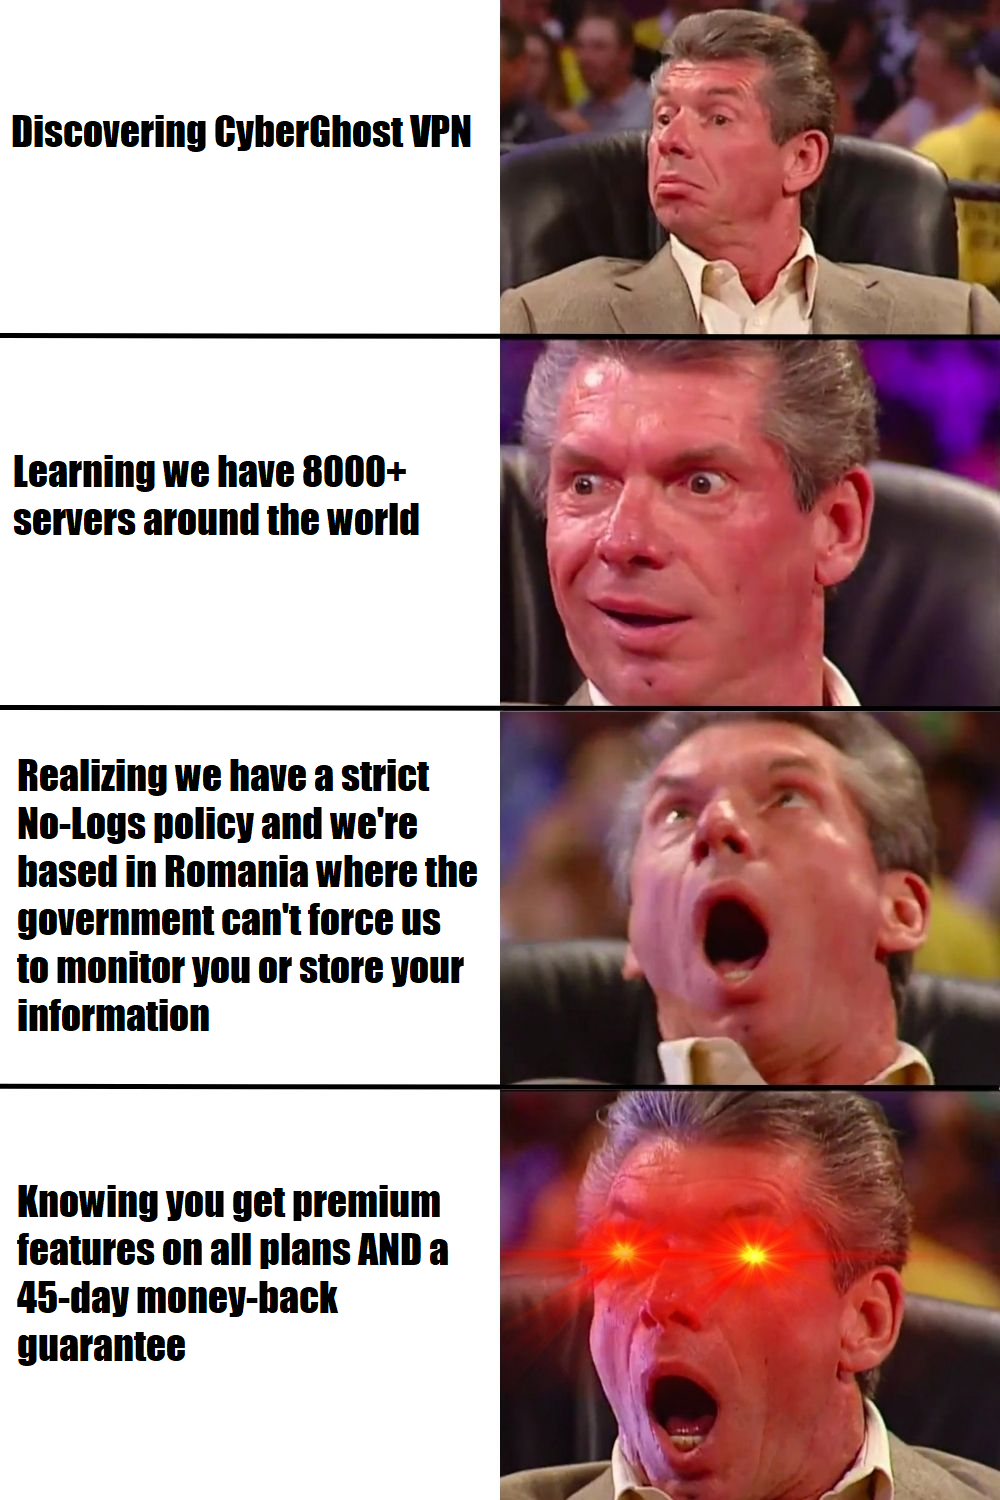 A Vince McMahon meme used to promote CyberGhost VPN's features